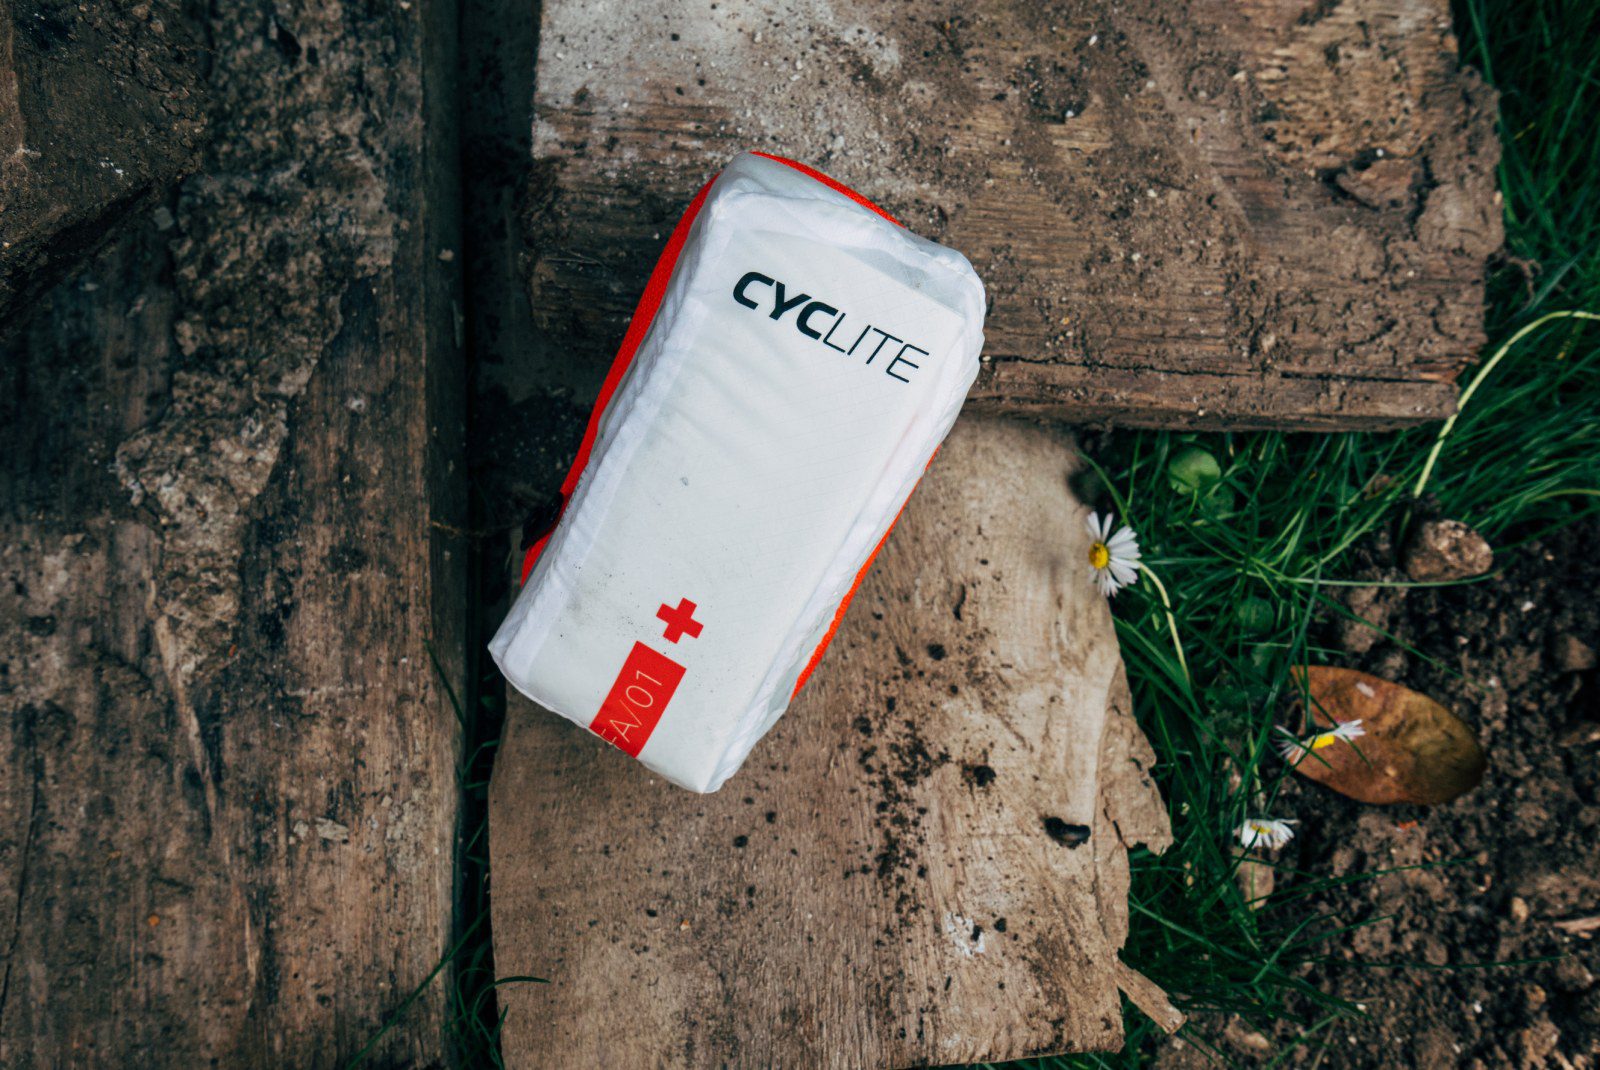 BETTER SAFE THAN SORRY: CYCLITE FIRST AID KIT